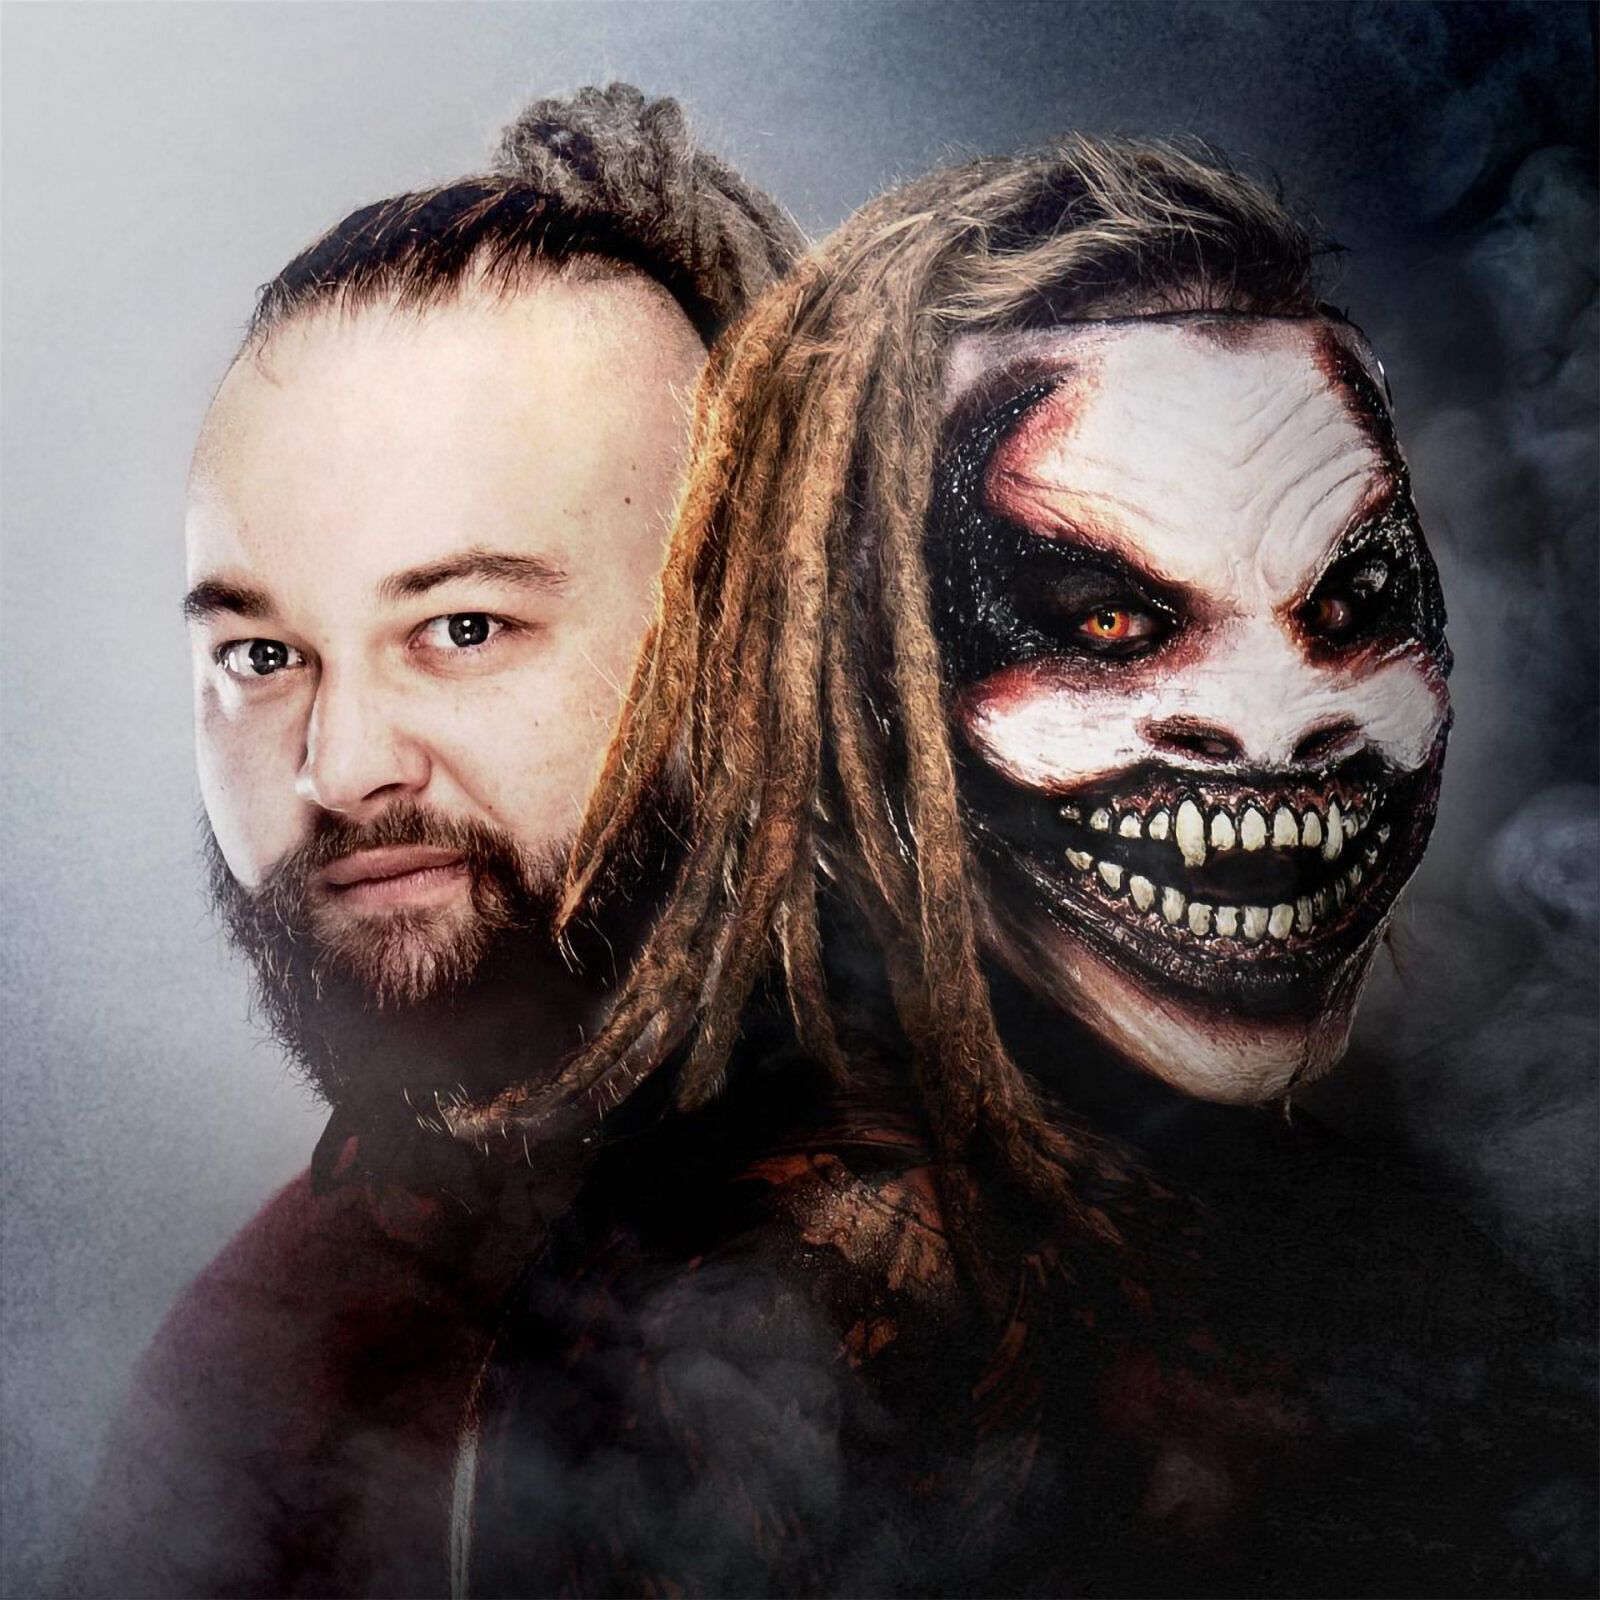 Although acknowledged on screen as a single entity, the charatcers of Bray Wyatt and The Fiend were polar opposites